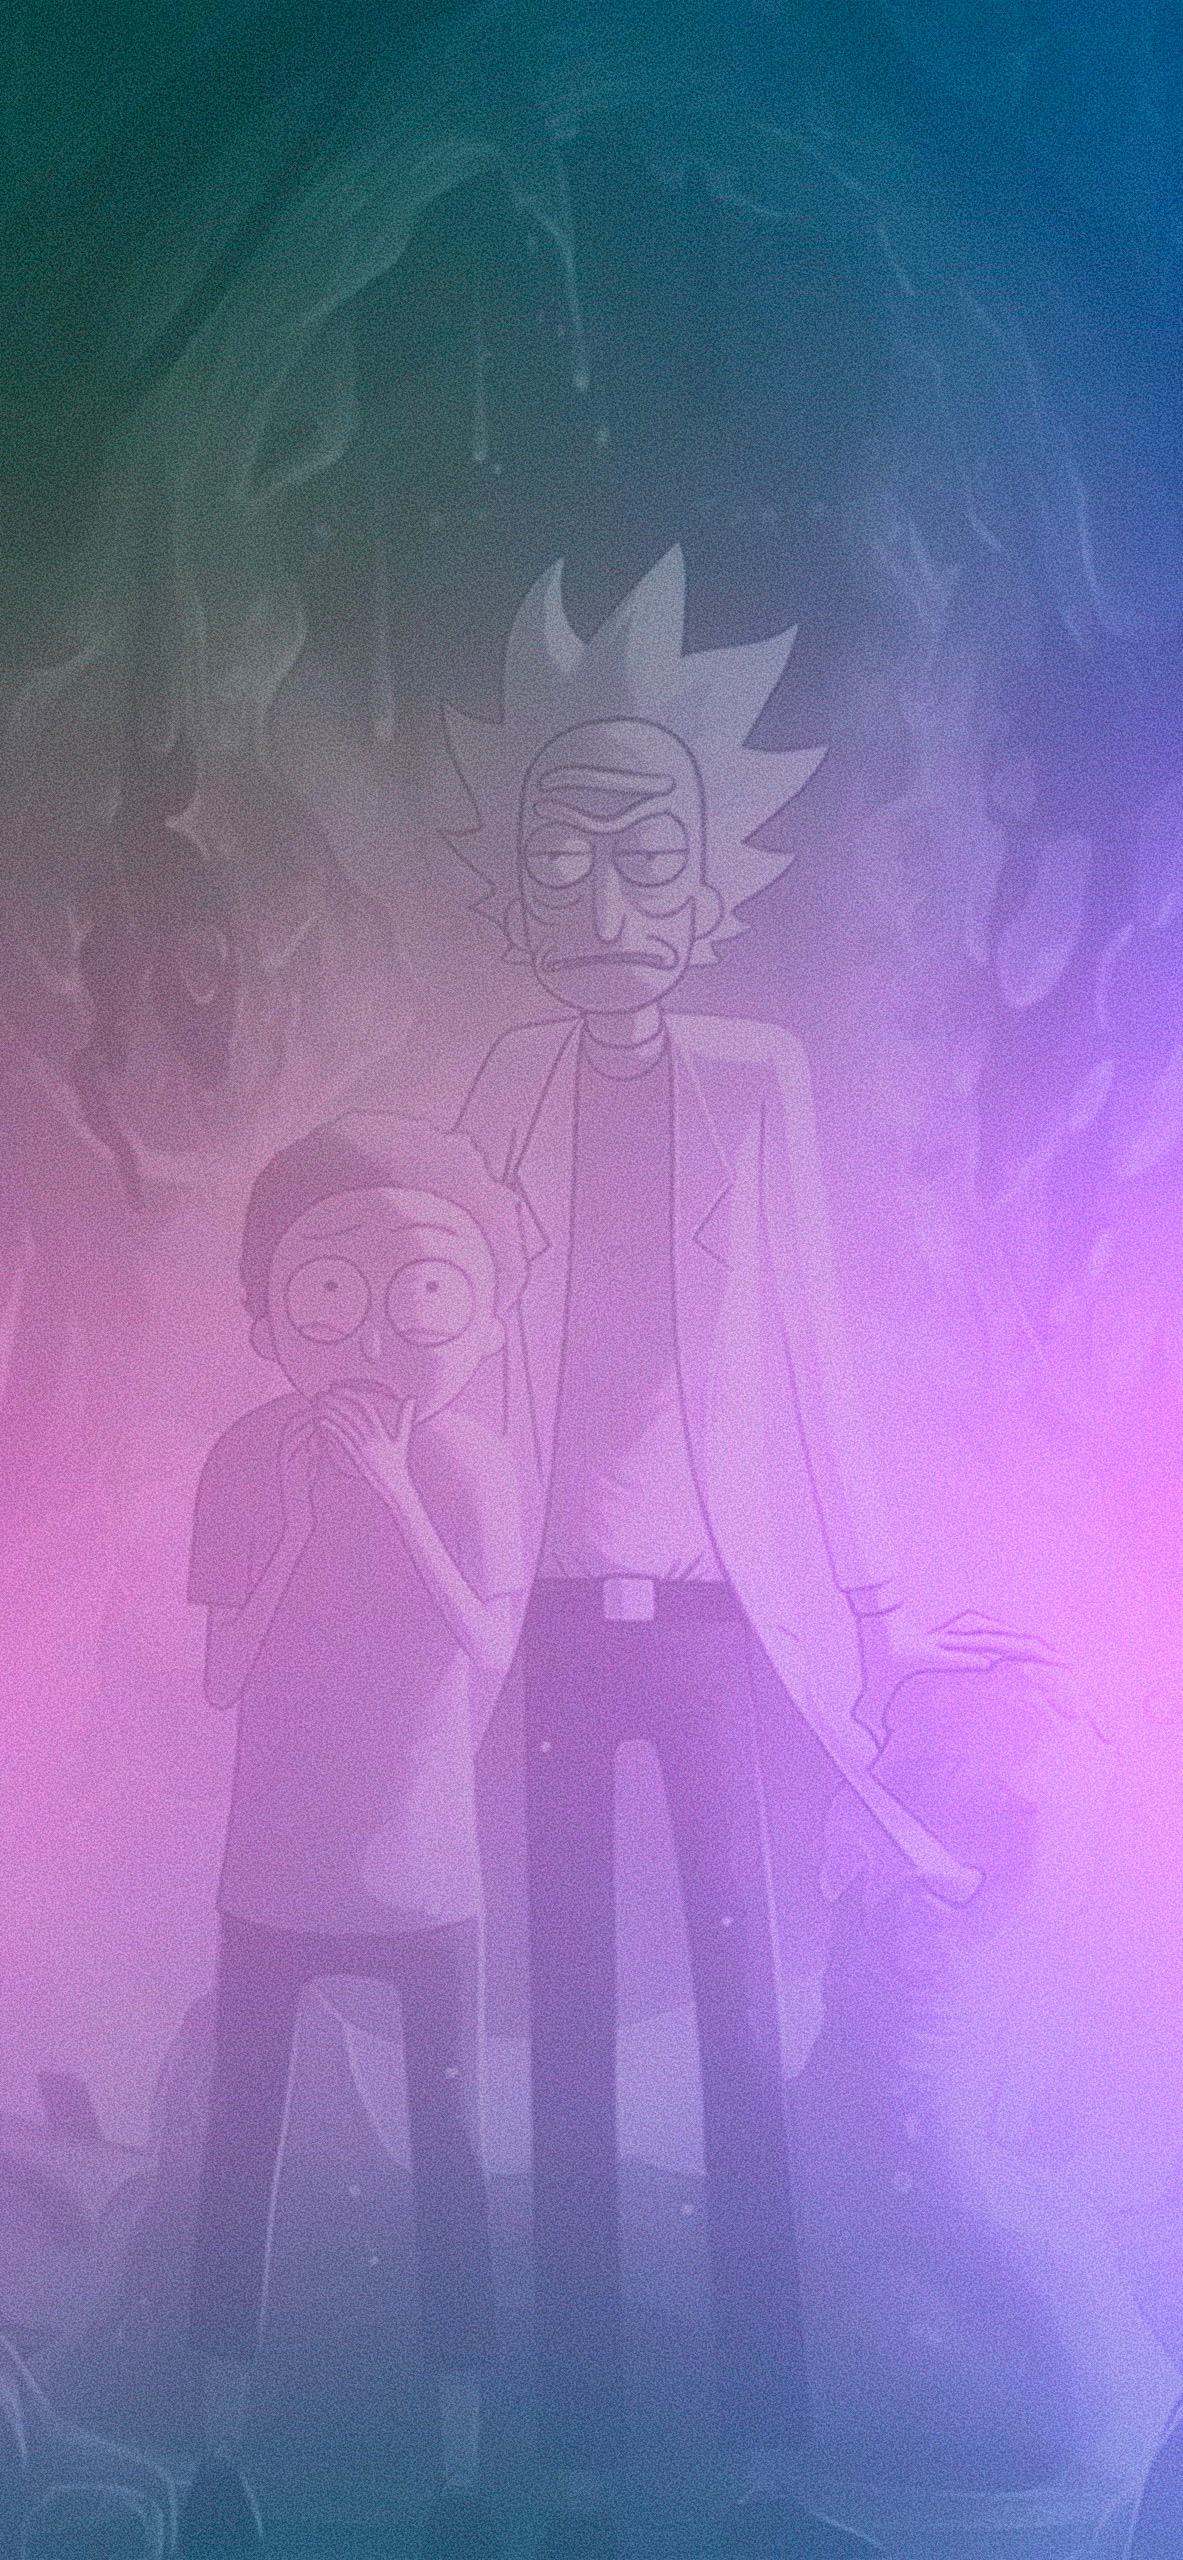 rick and morty slime in the cave background